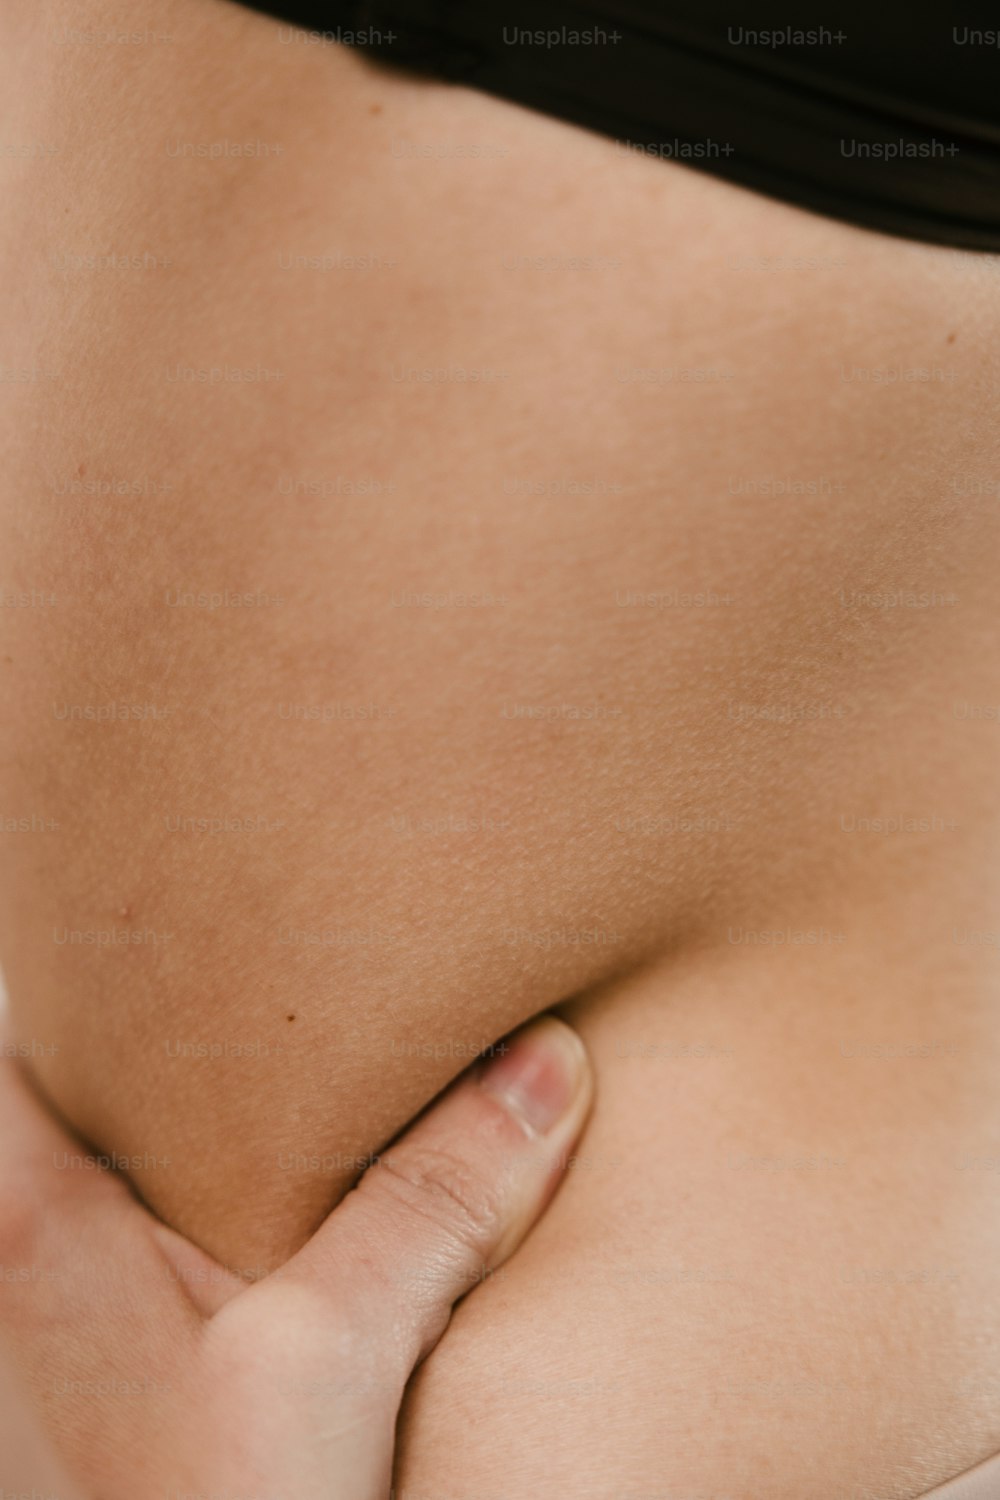 a close up of a woman's butt with her hand on her hip